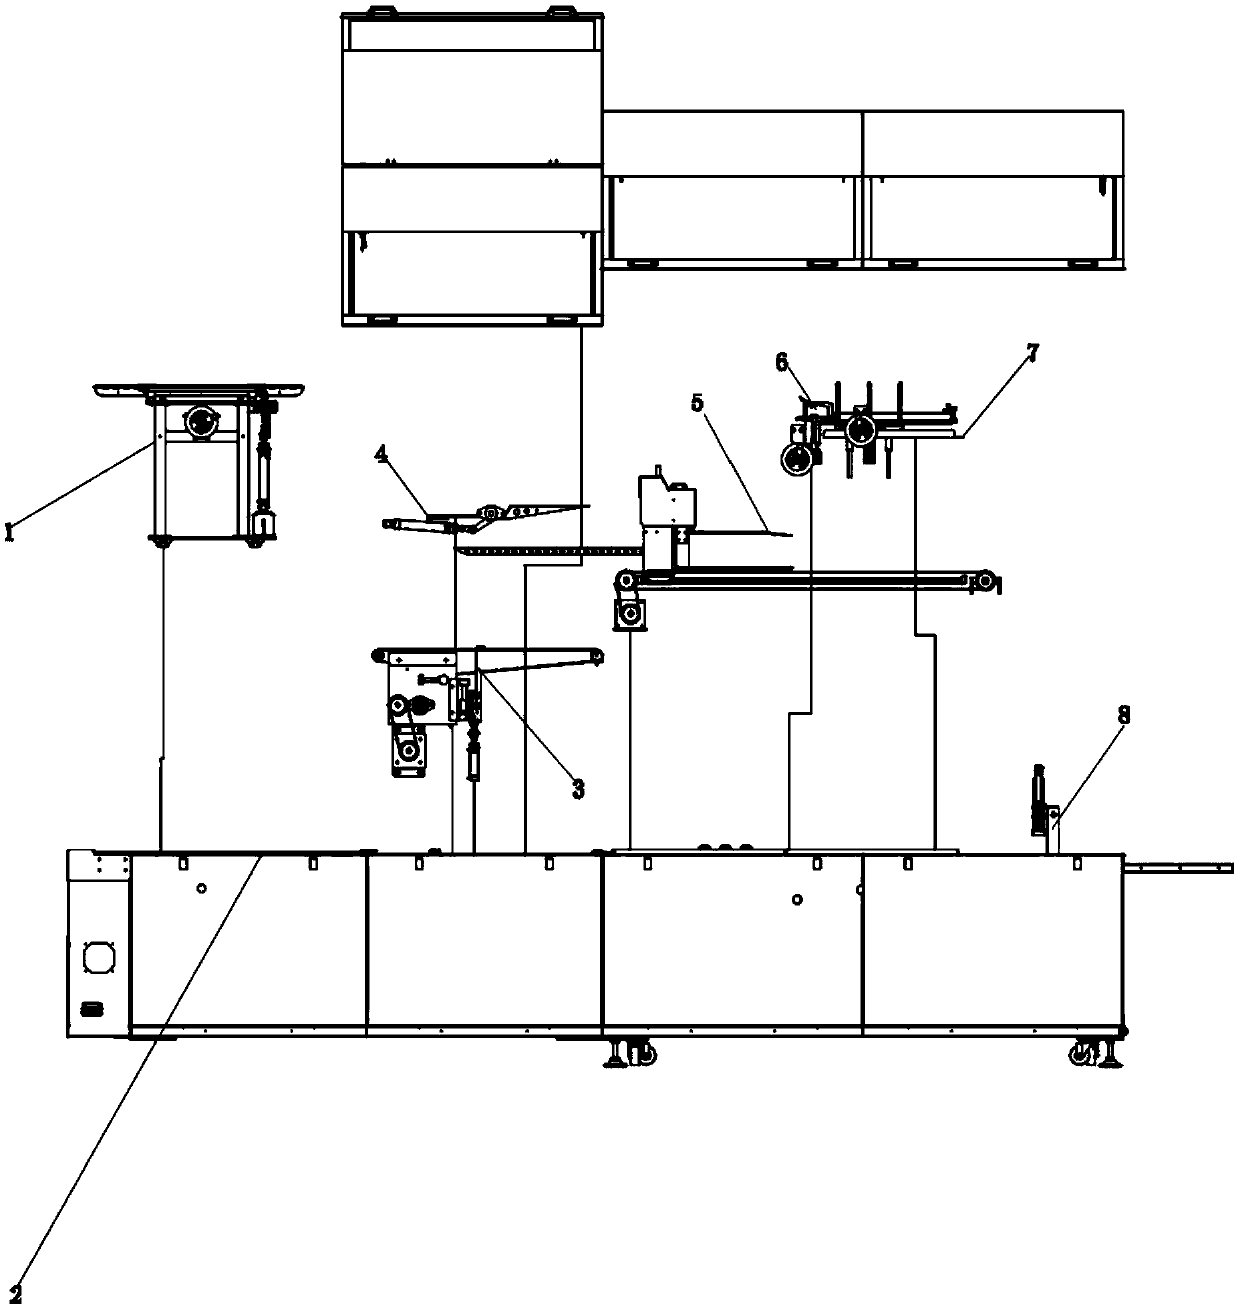 Automatic packaging equipment, method and system